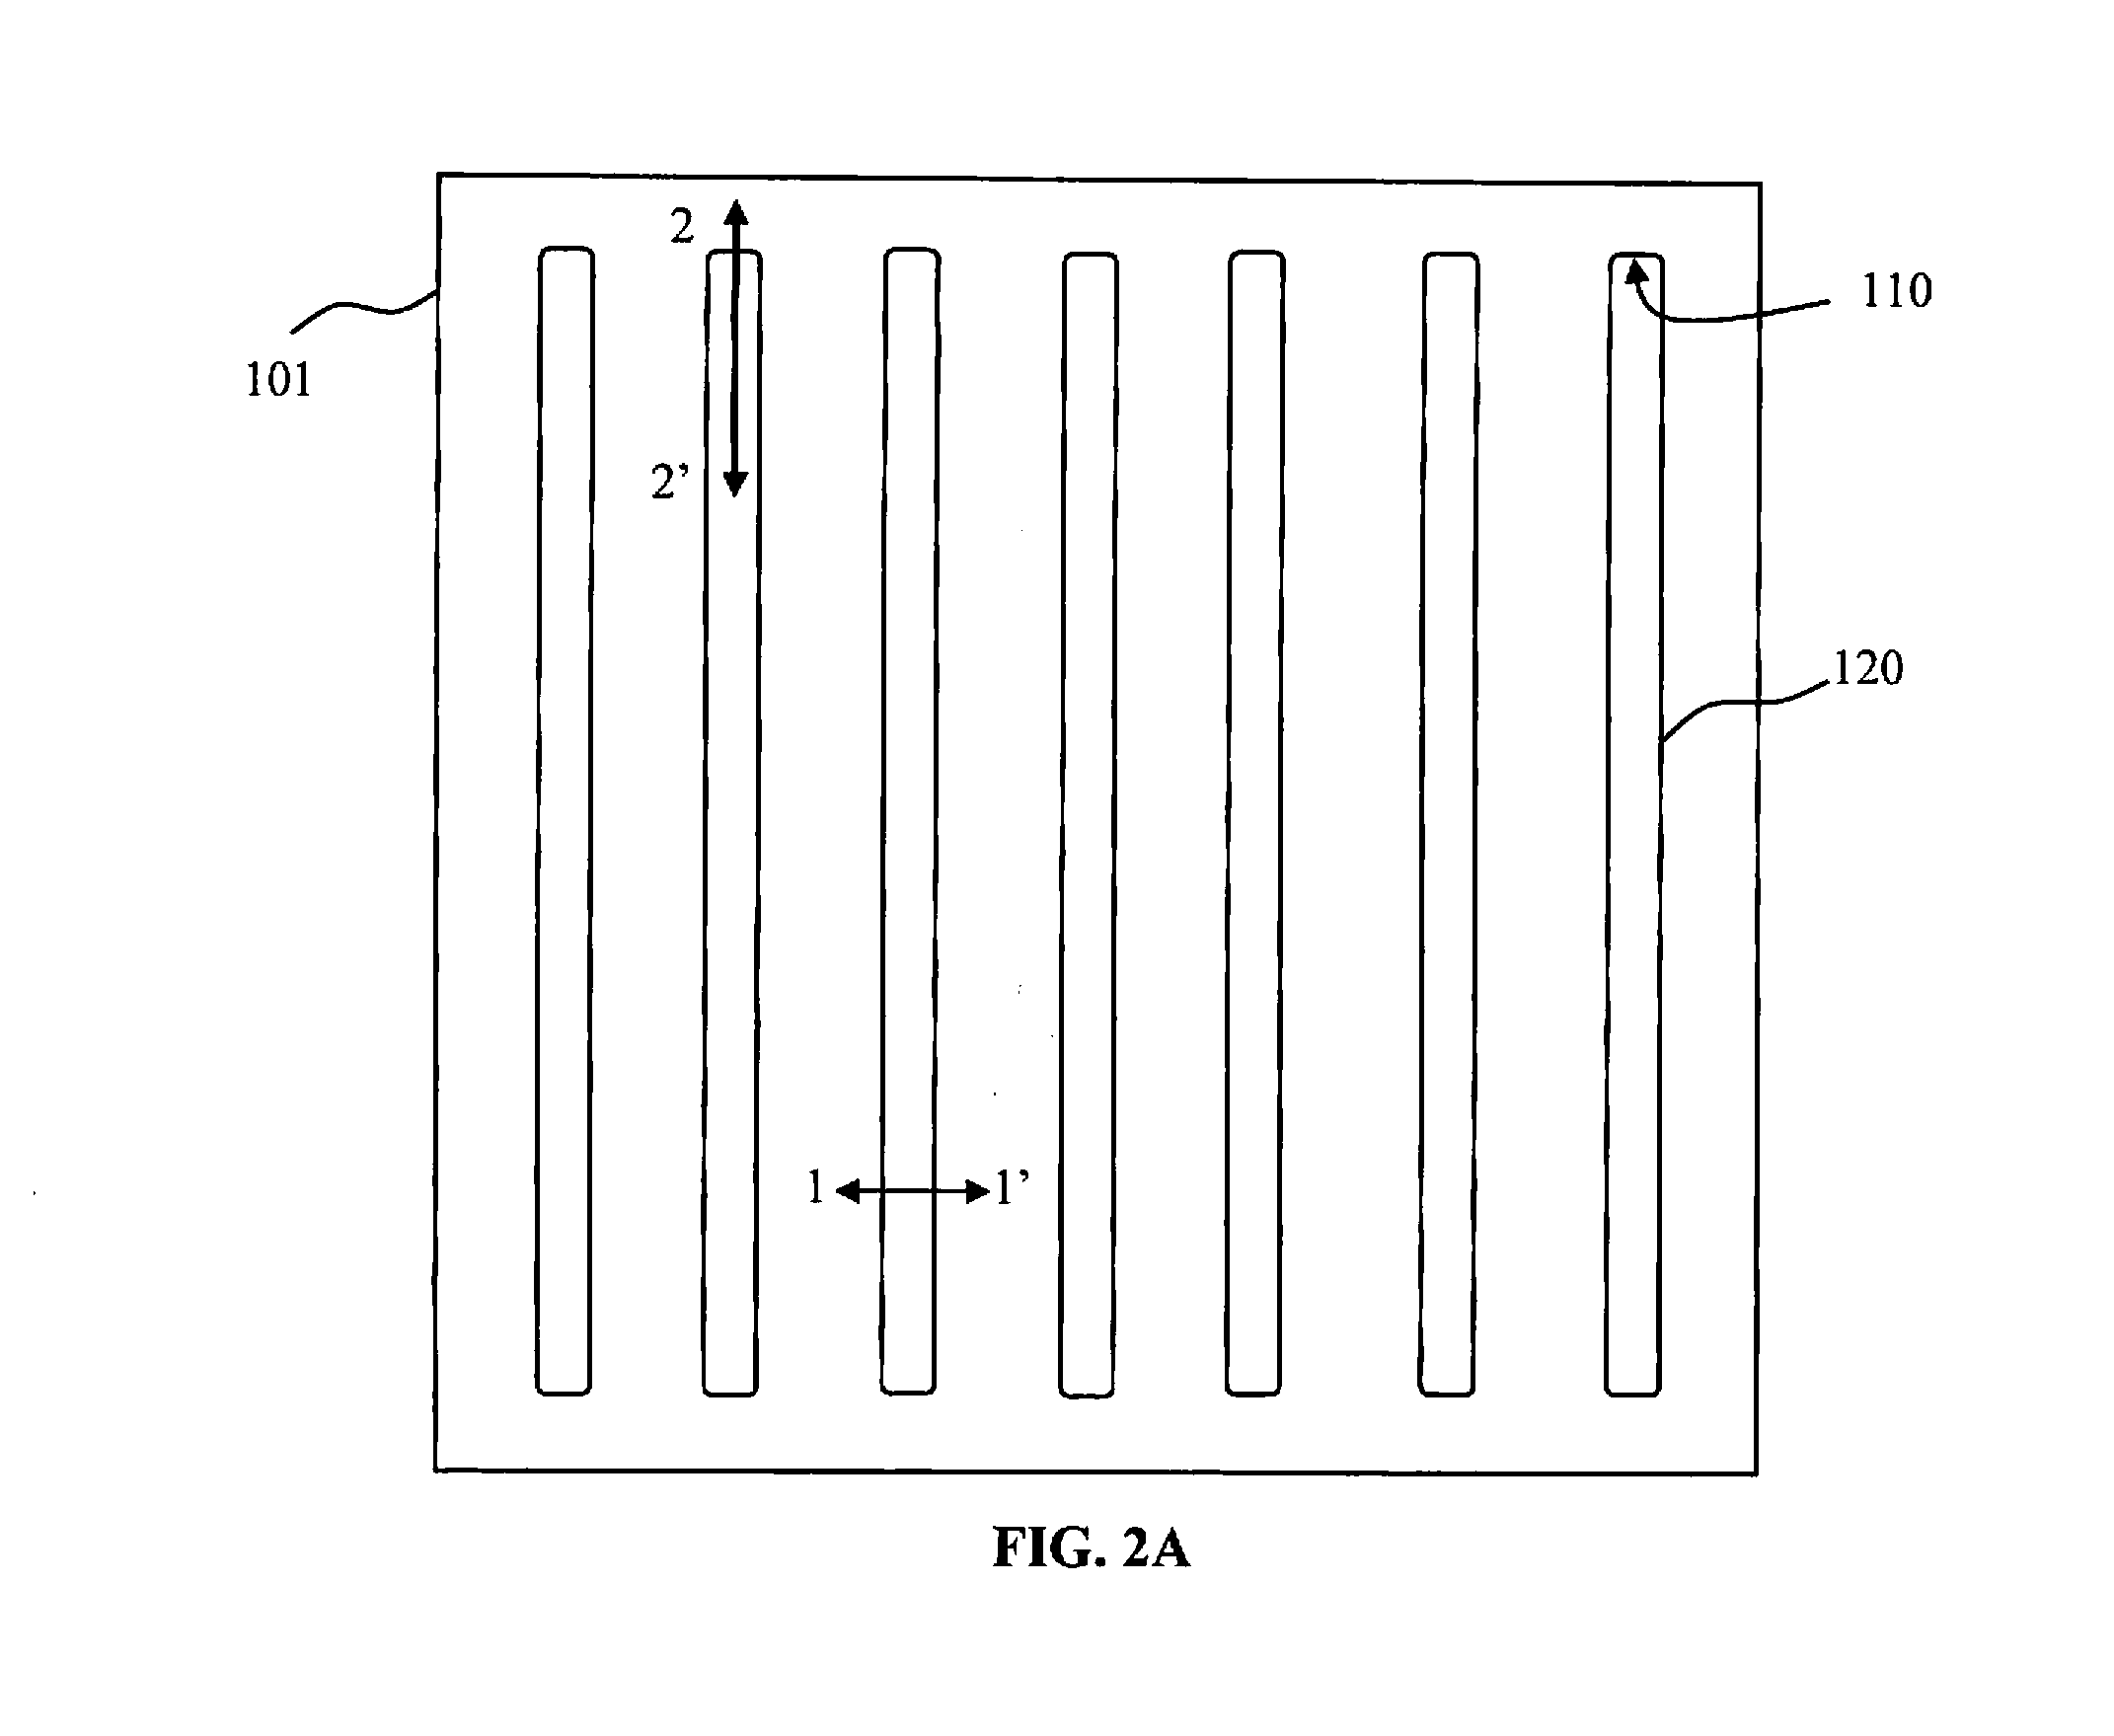 Process method and structure for high voltage mosfets